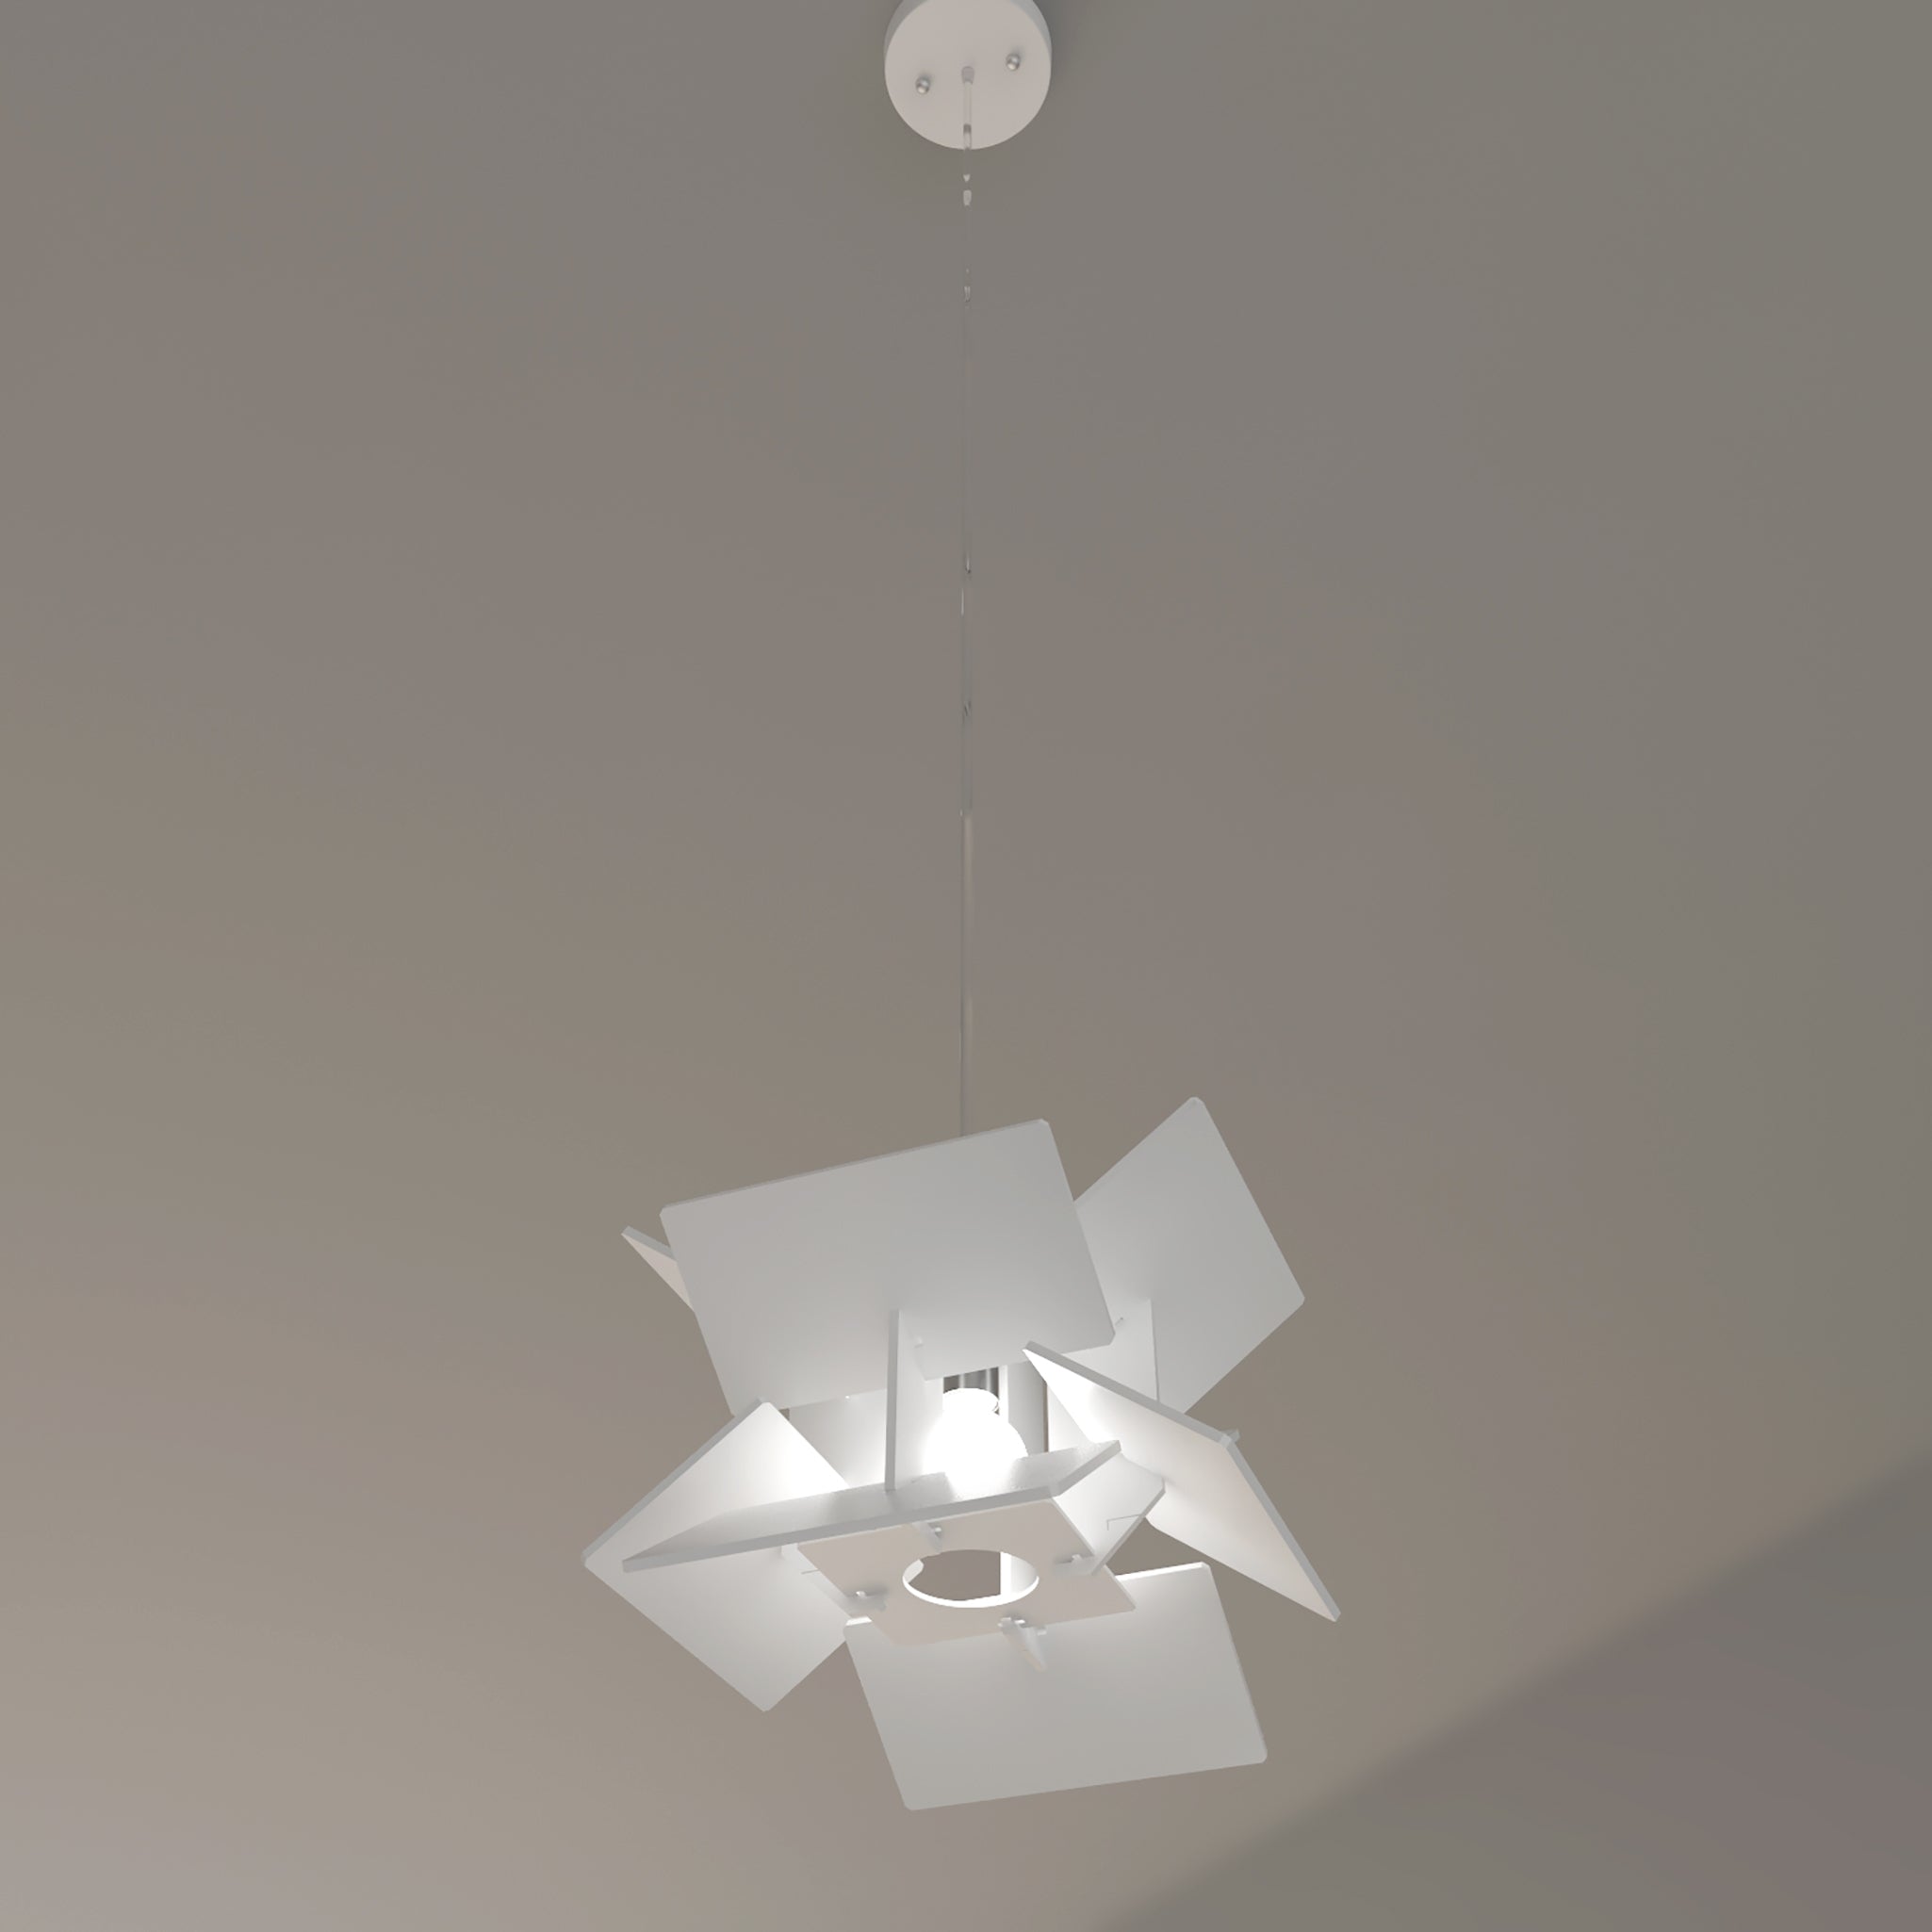 Designer pendant lights for home and office. The suspended small lamp in white